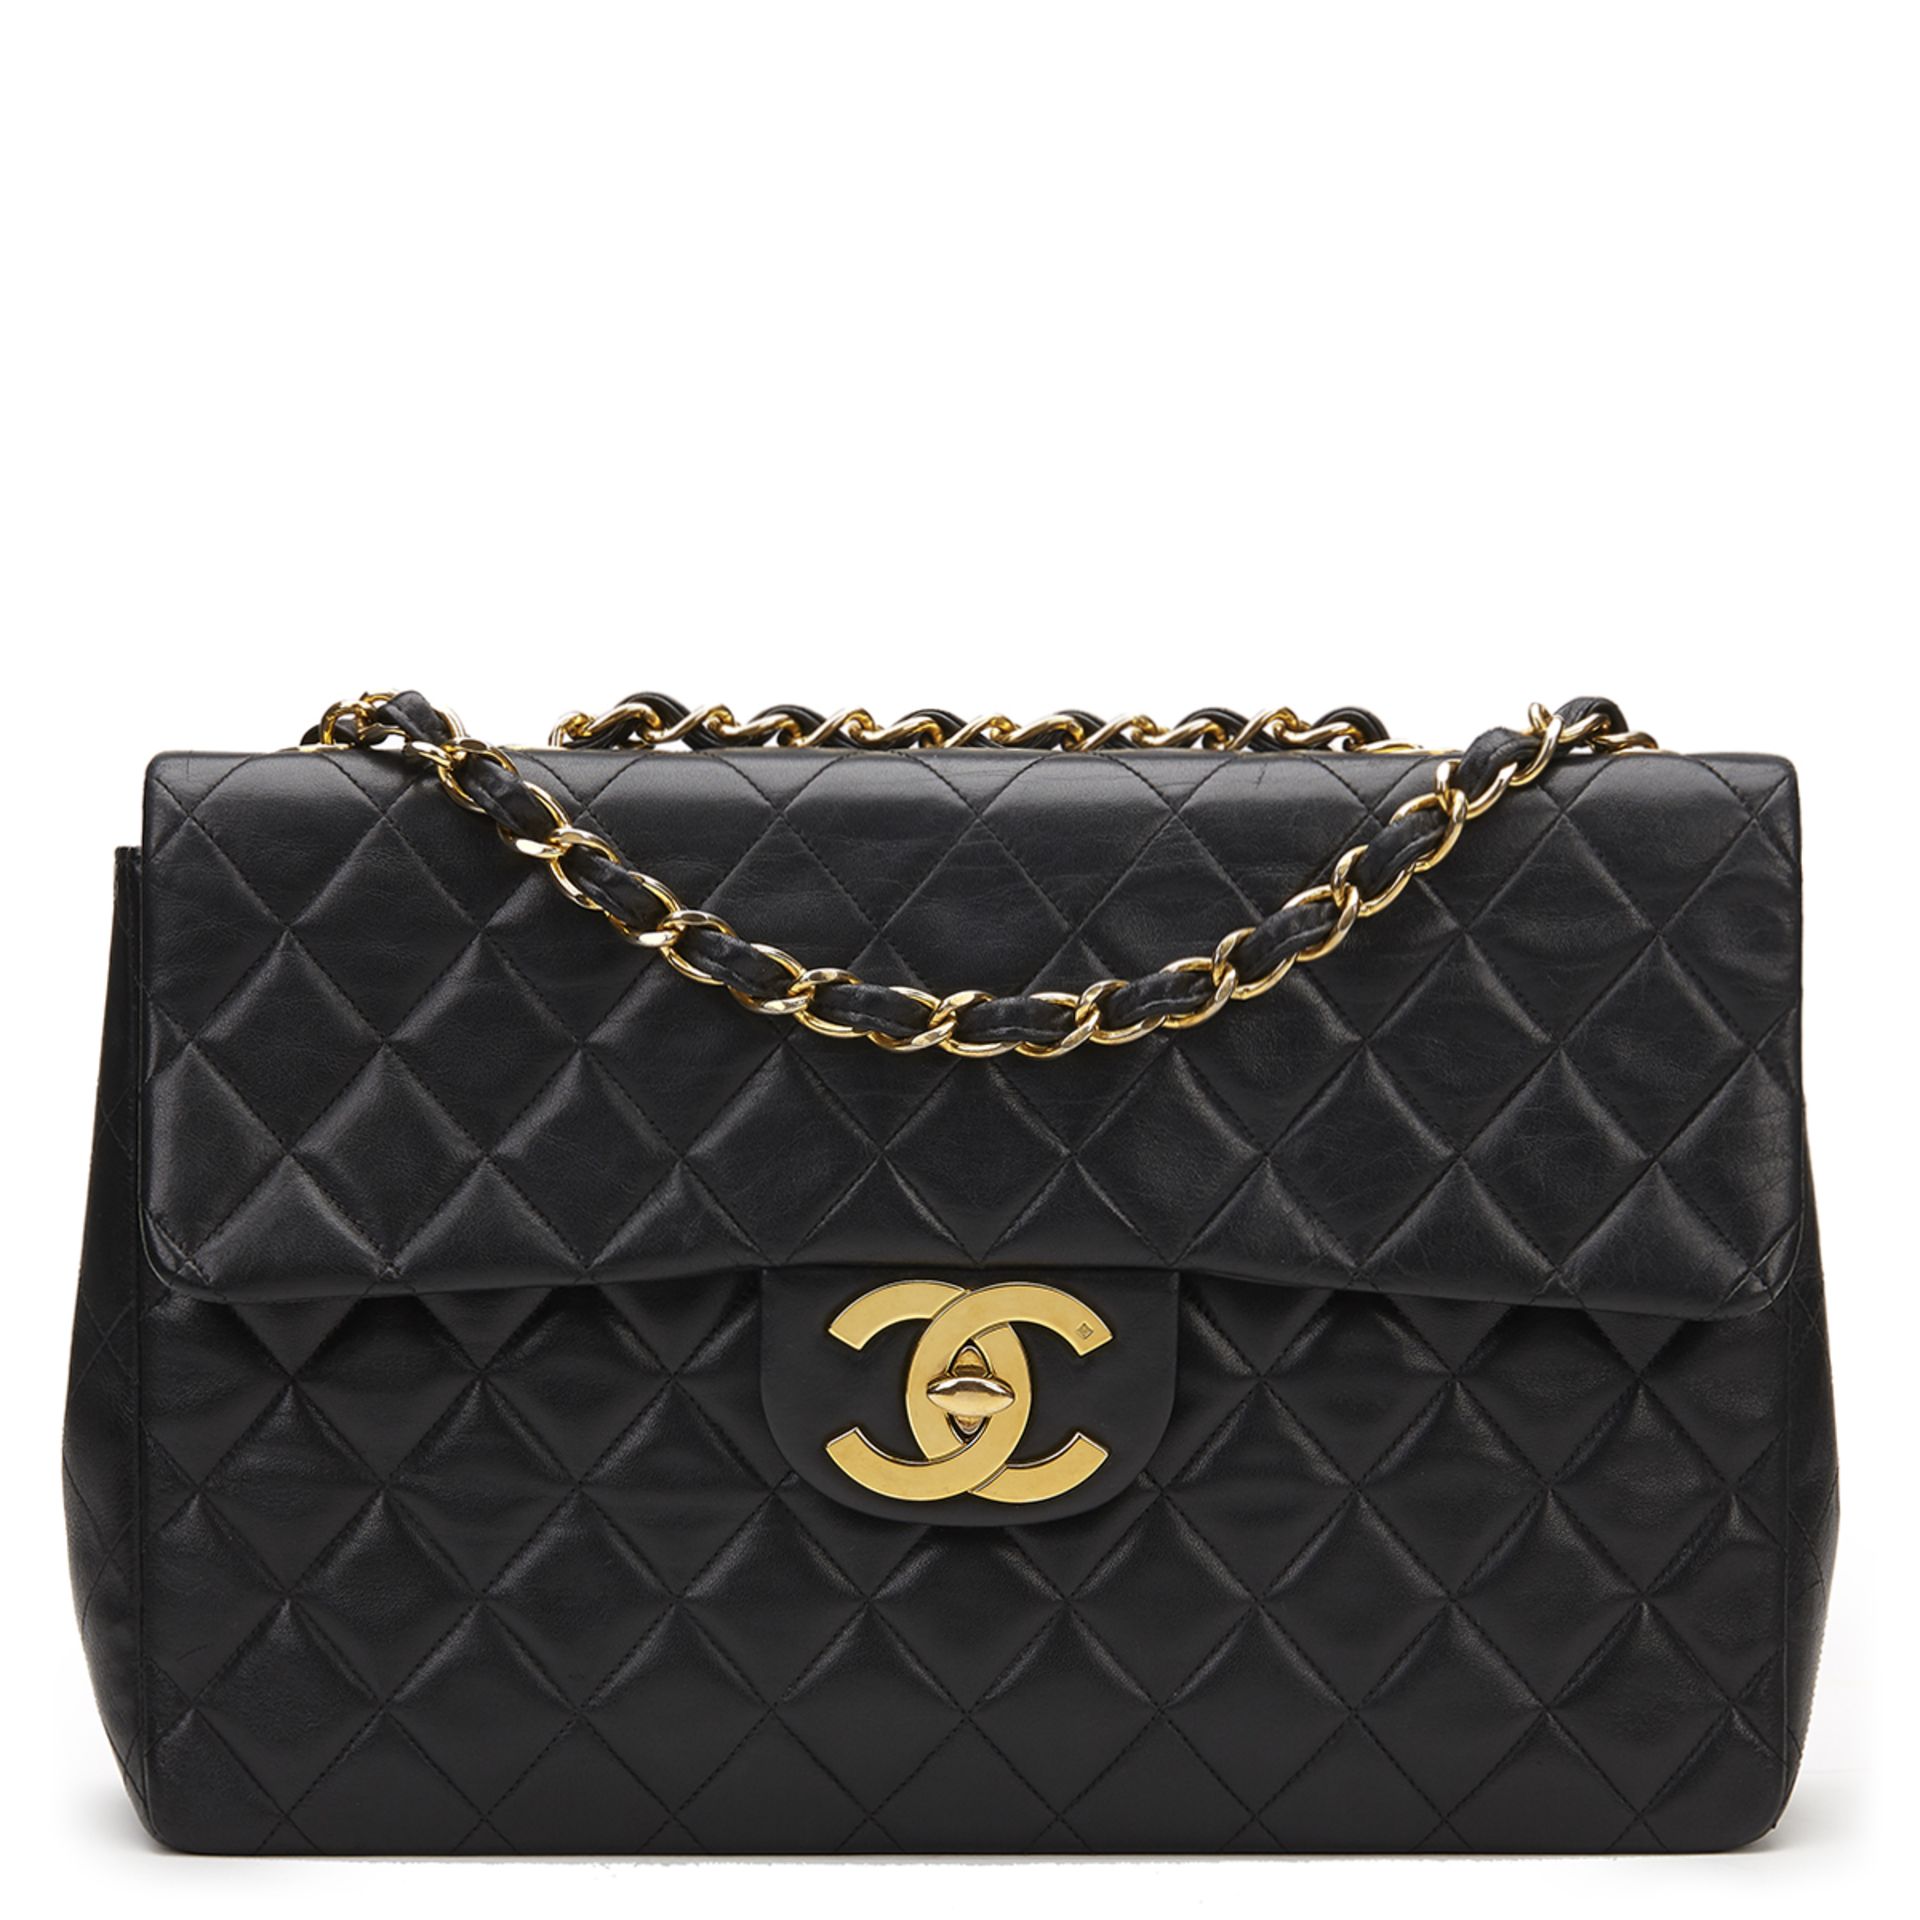 Chanel Black Quilted Lambskin Vintage Maxi Jumbo XL Flap Bag - Image 11 of 13